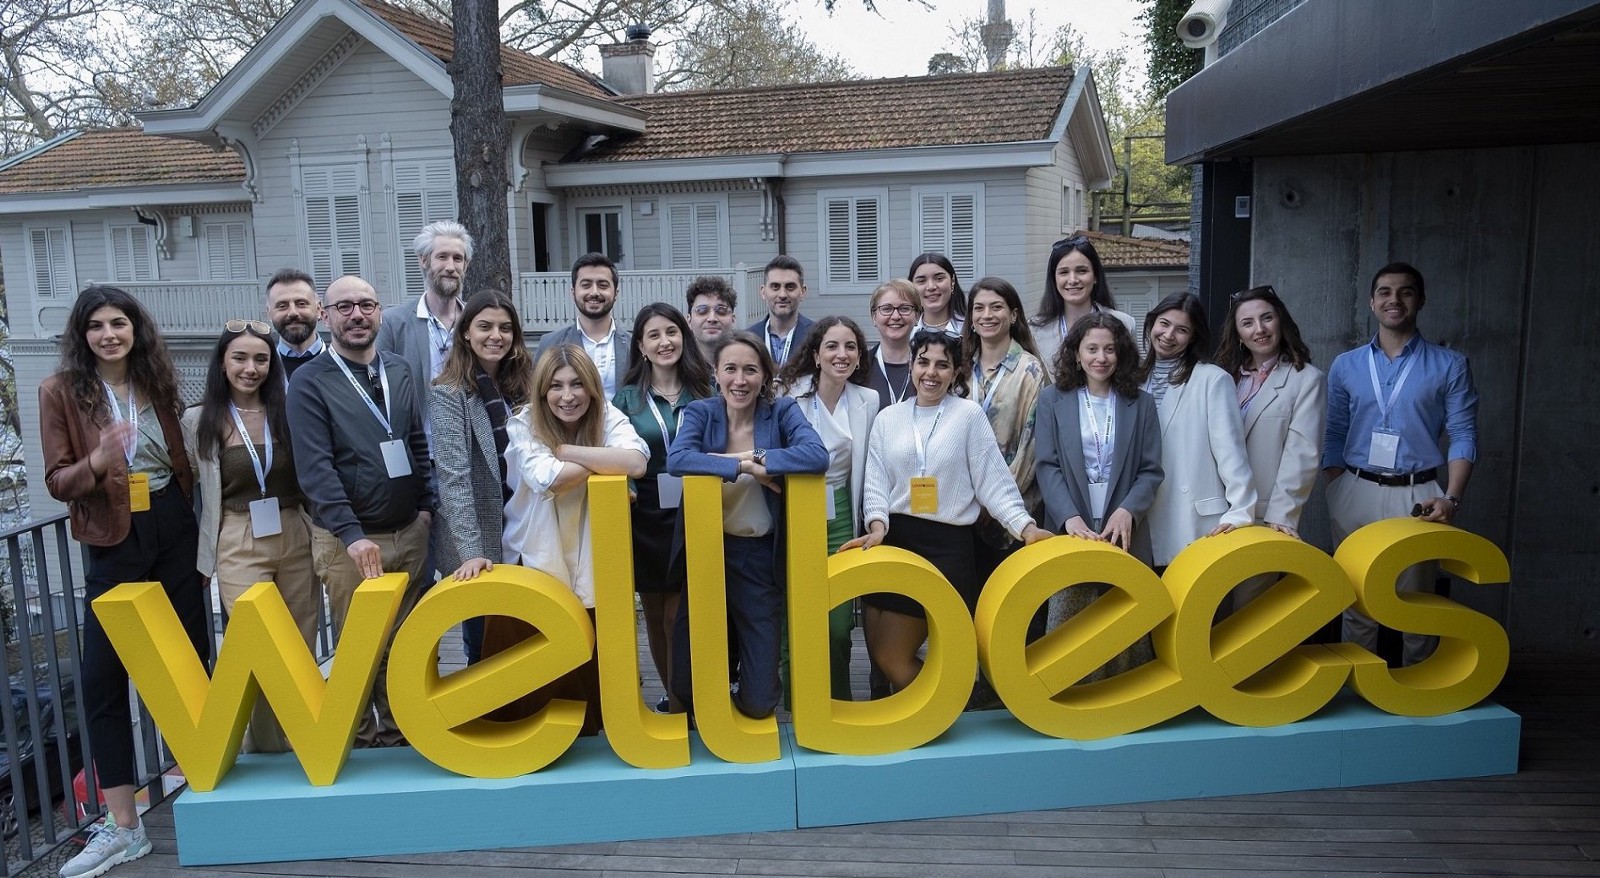 Wellbees